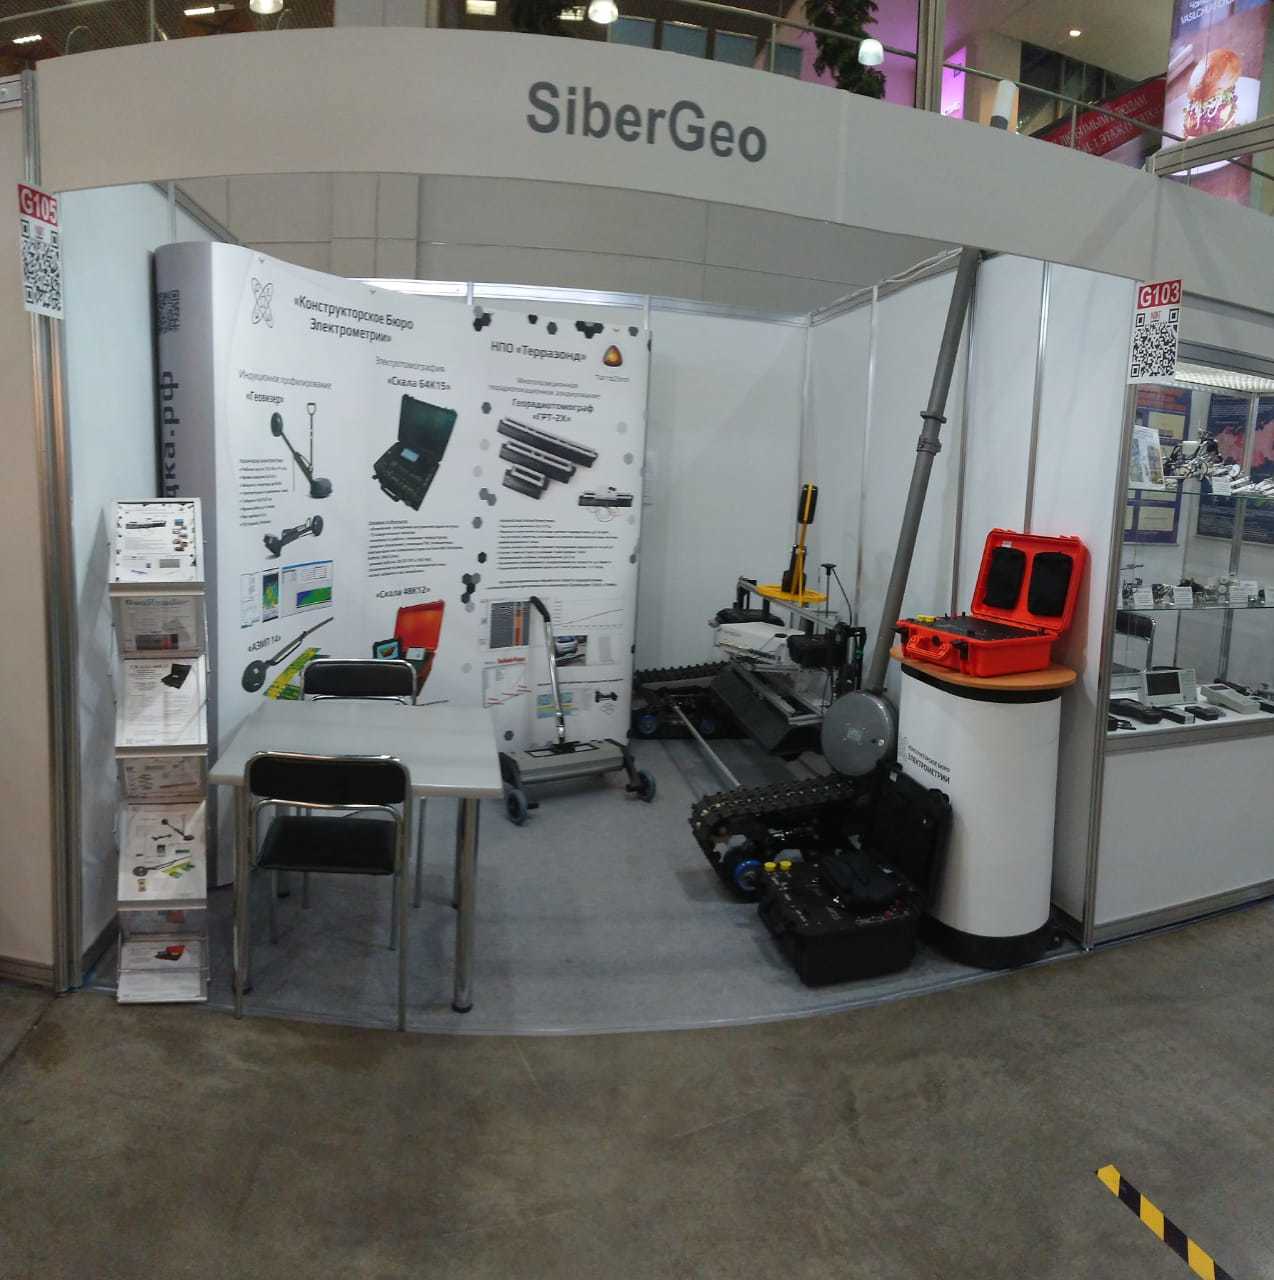 at the exhibition - SiberGeo stand